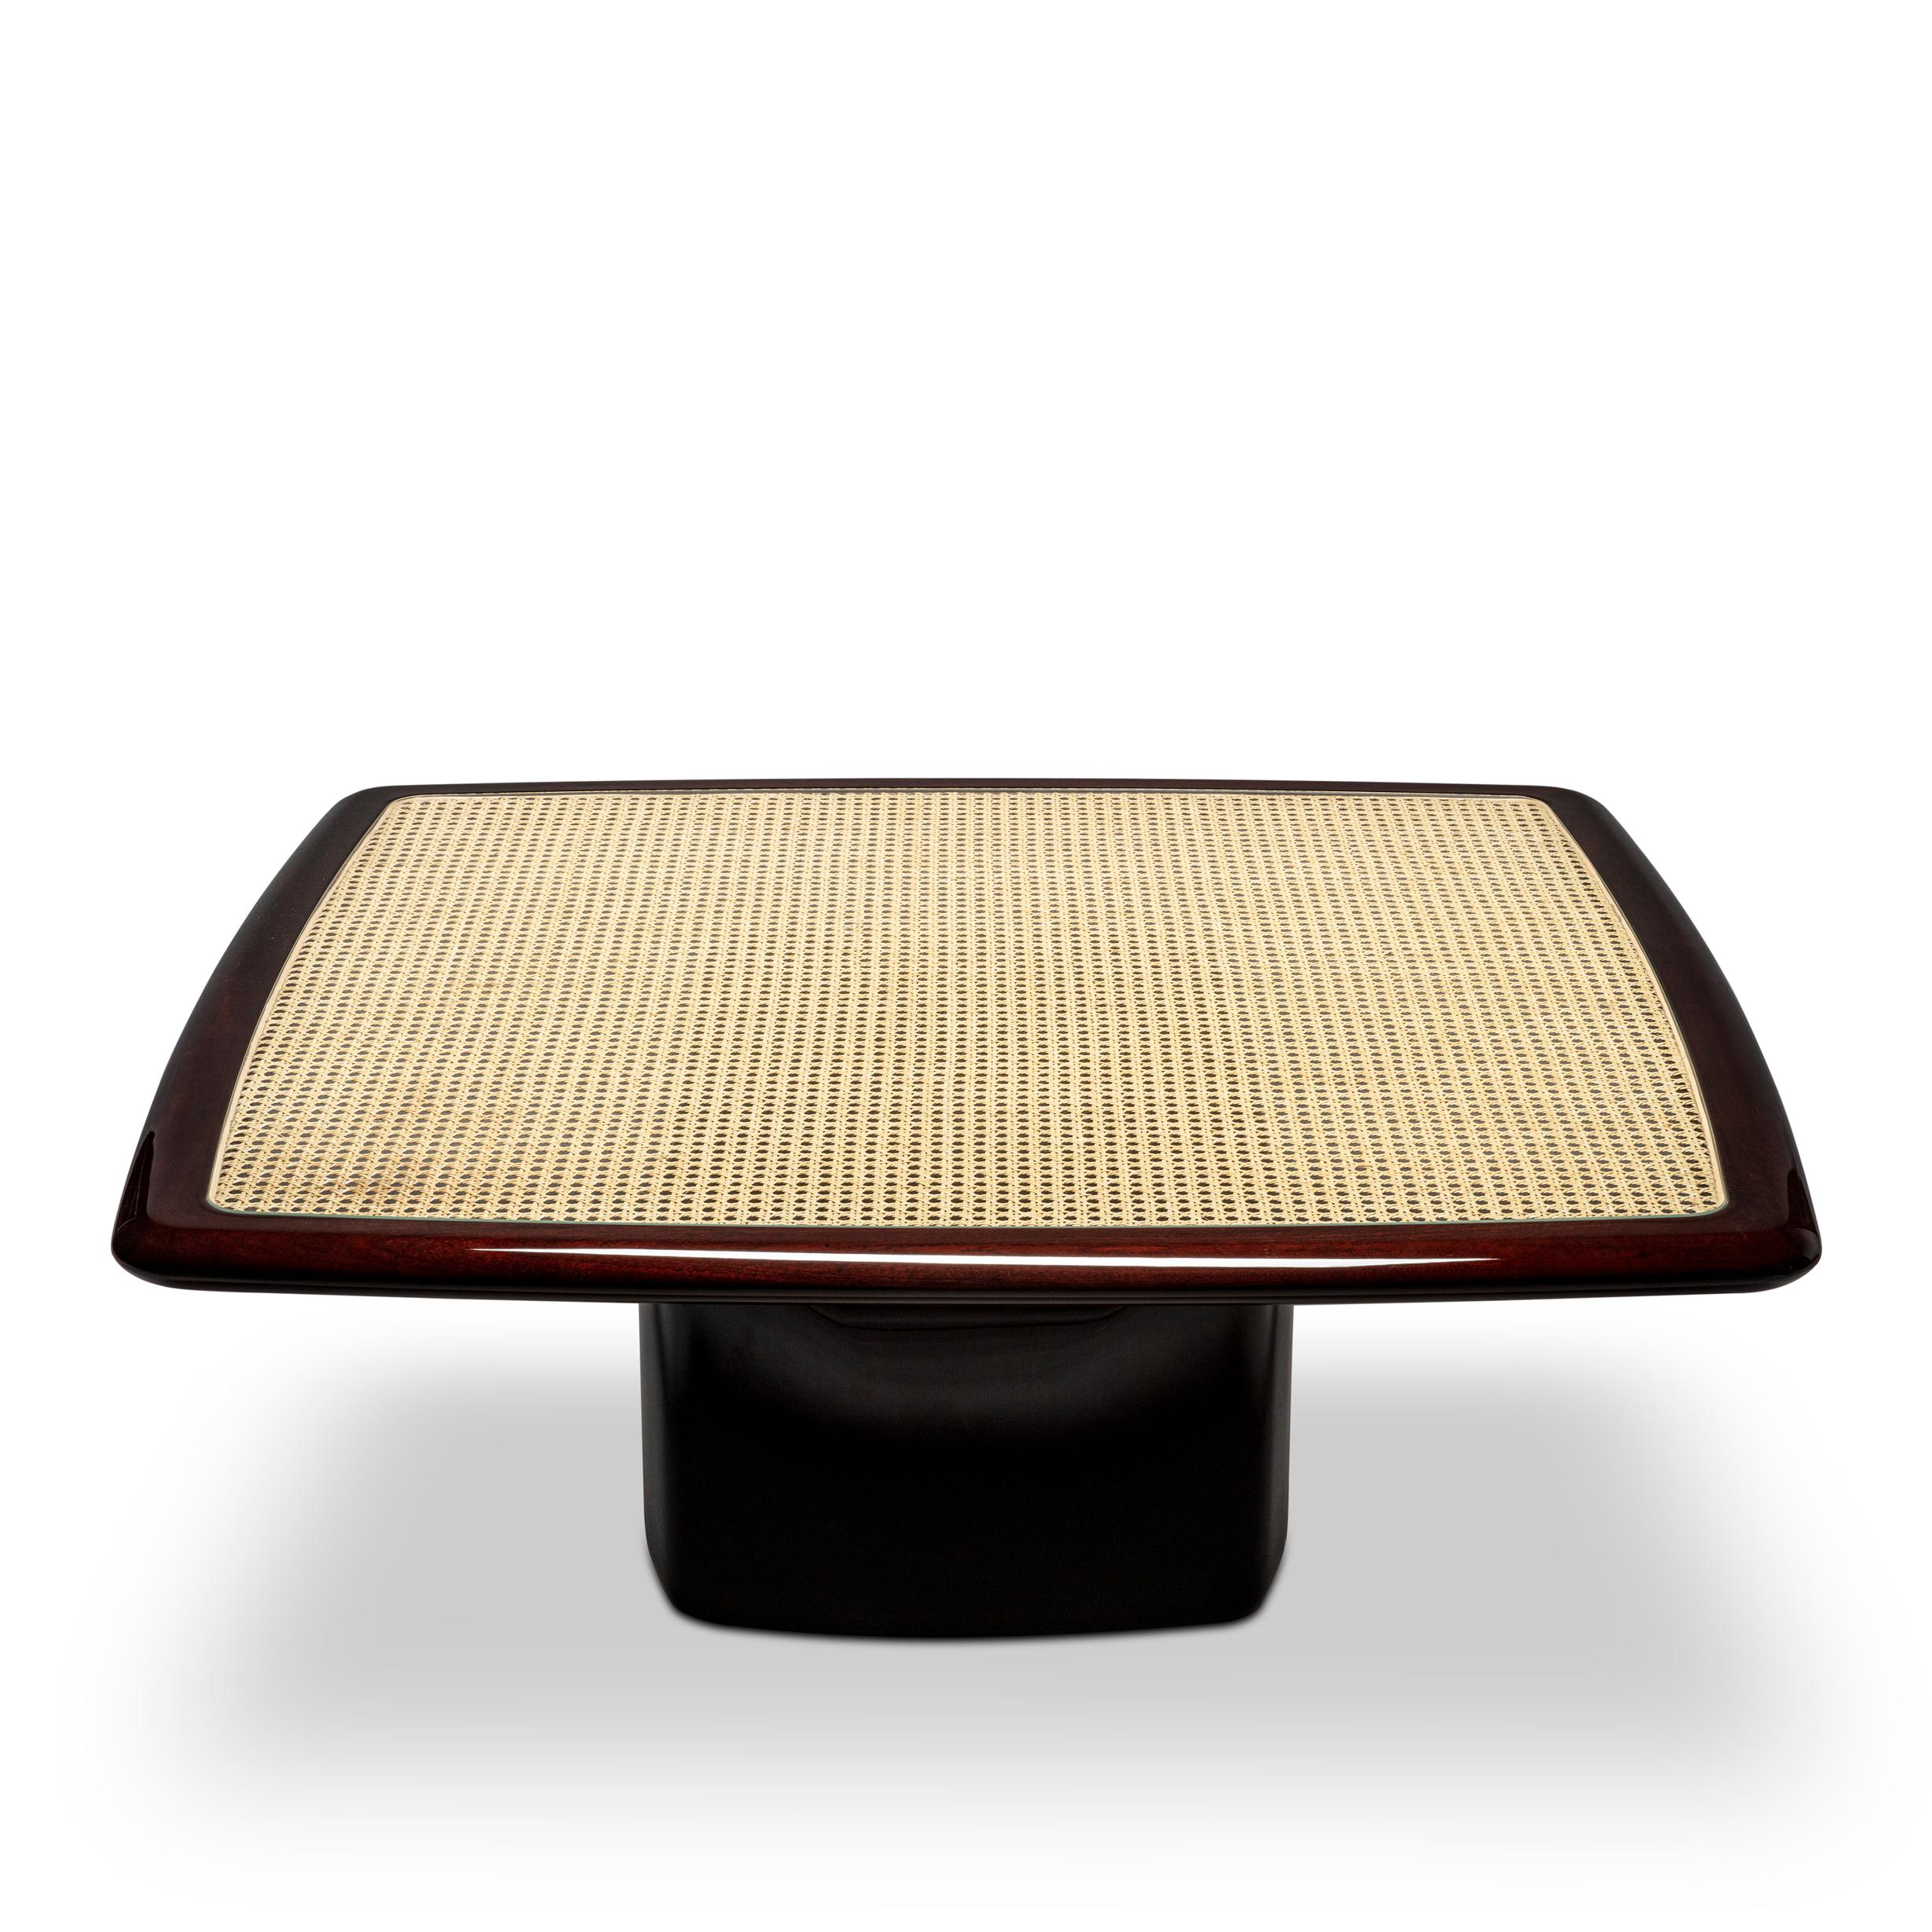 Bossa Square Coffee Table by DUISTT 
Dimensions: W 100 x D 100 x H 39 cm
Materials: High gloss Mahogany wood, Cane and Glass 
Assembly required

The Bossa square coffee table, crafted with great attention to detail, is inspired by the subtlety,